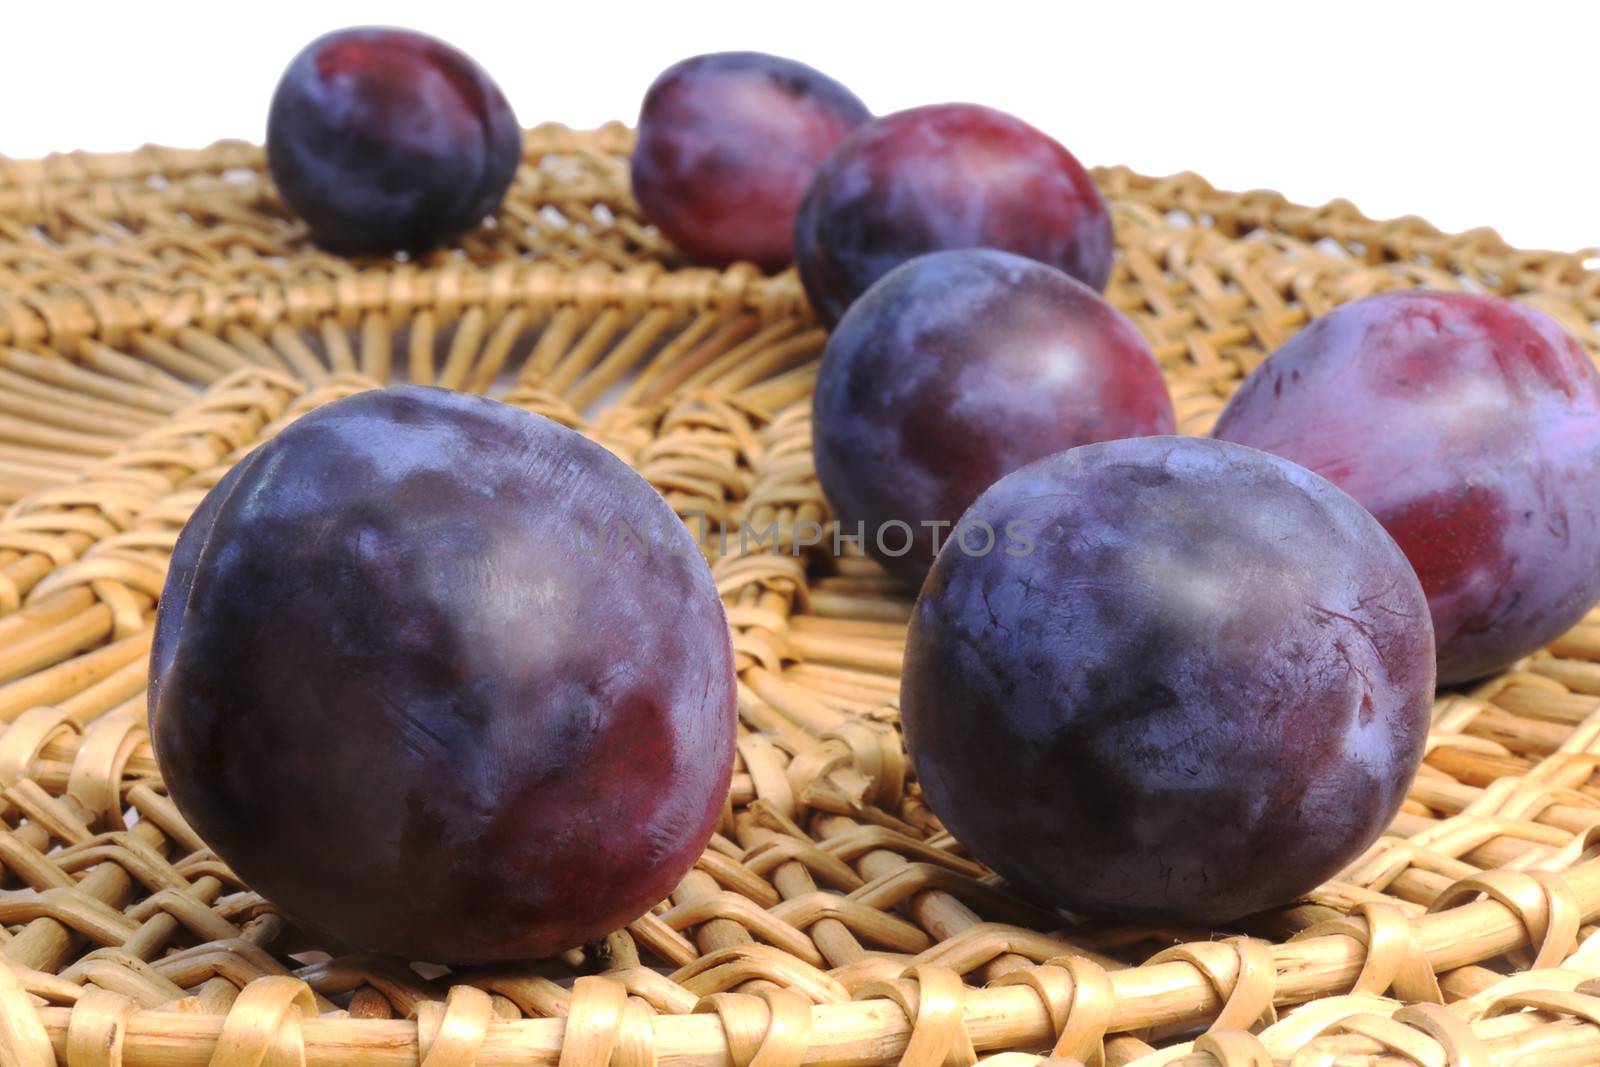 Large ripe purple plum wicker dish. Presented on a white background.